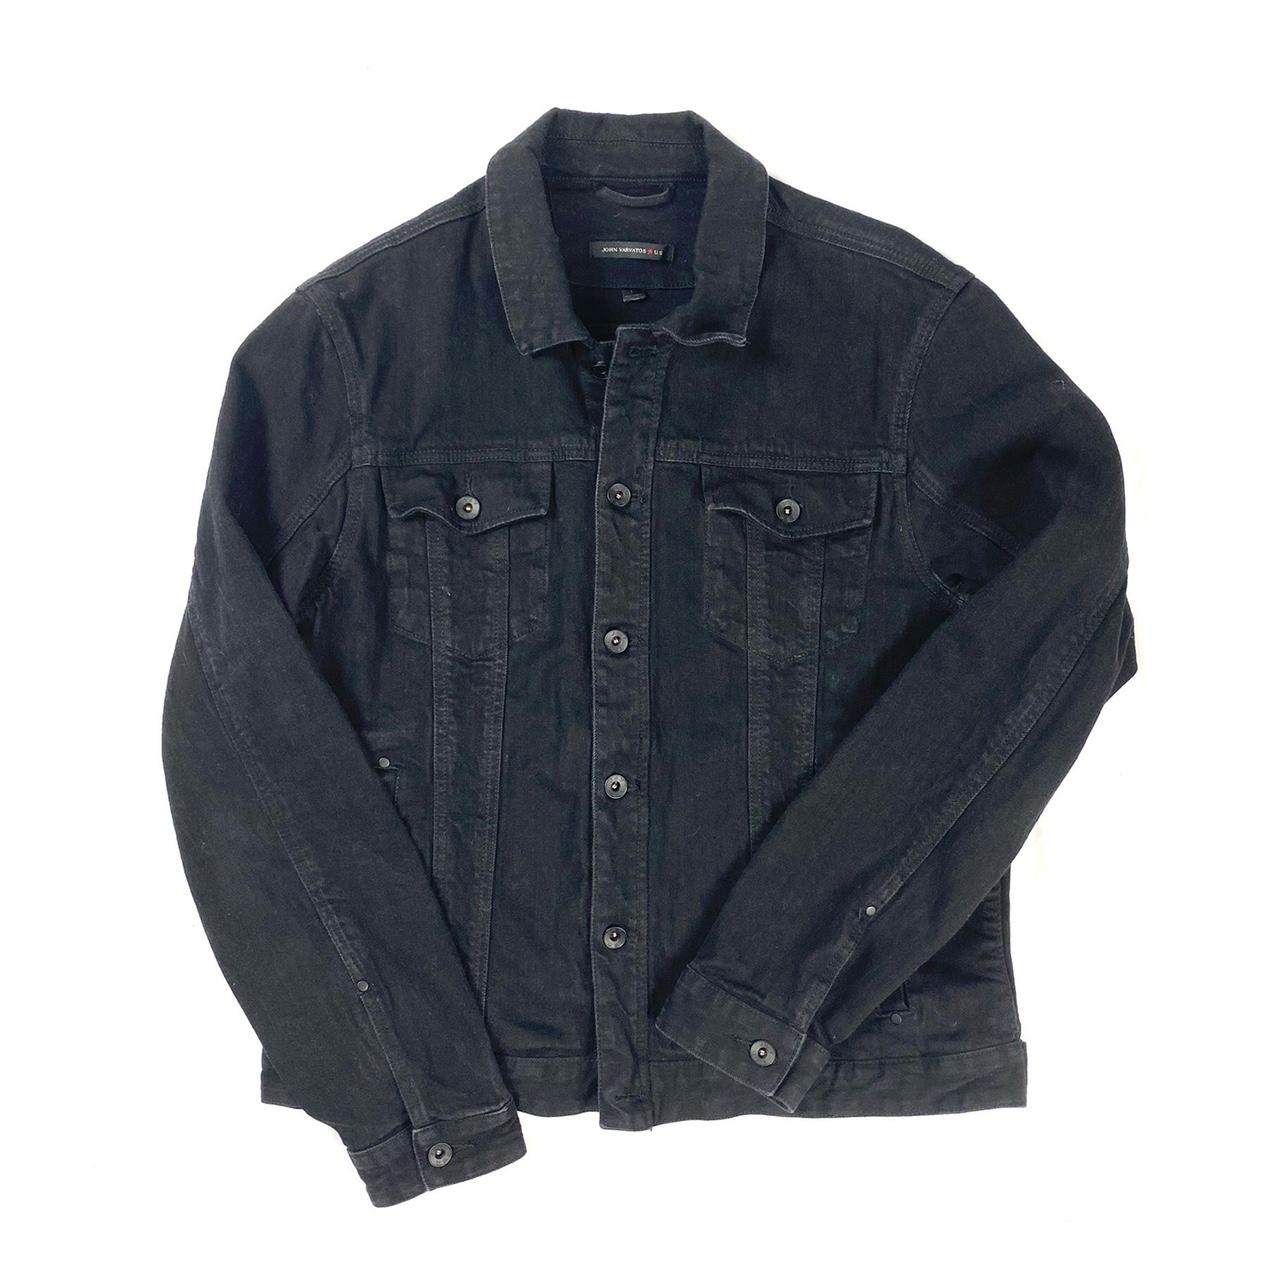 John Varvatos - The Resort Collection x Pink Floyd New Drop - The Limited  Edition Trucker Jacket In store and at johnvarvatos.com | Facebook